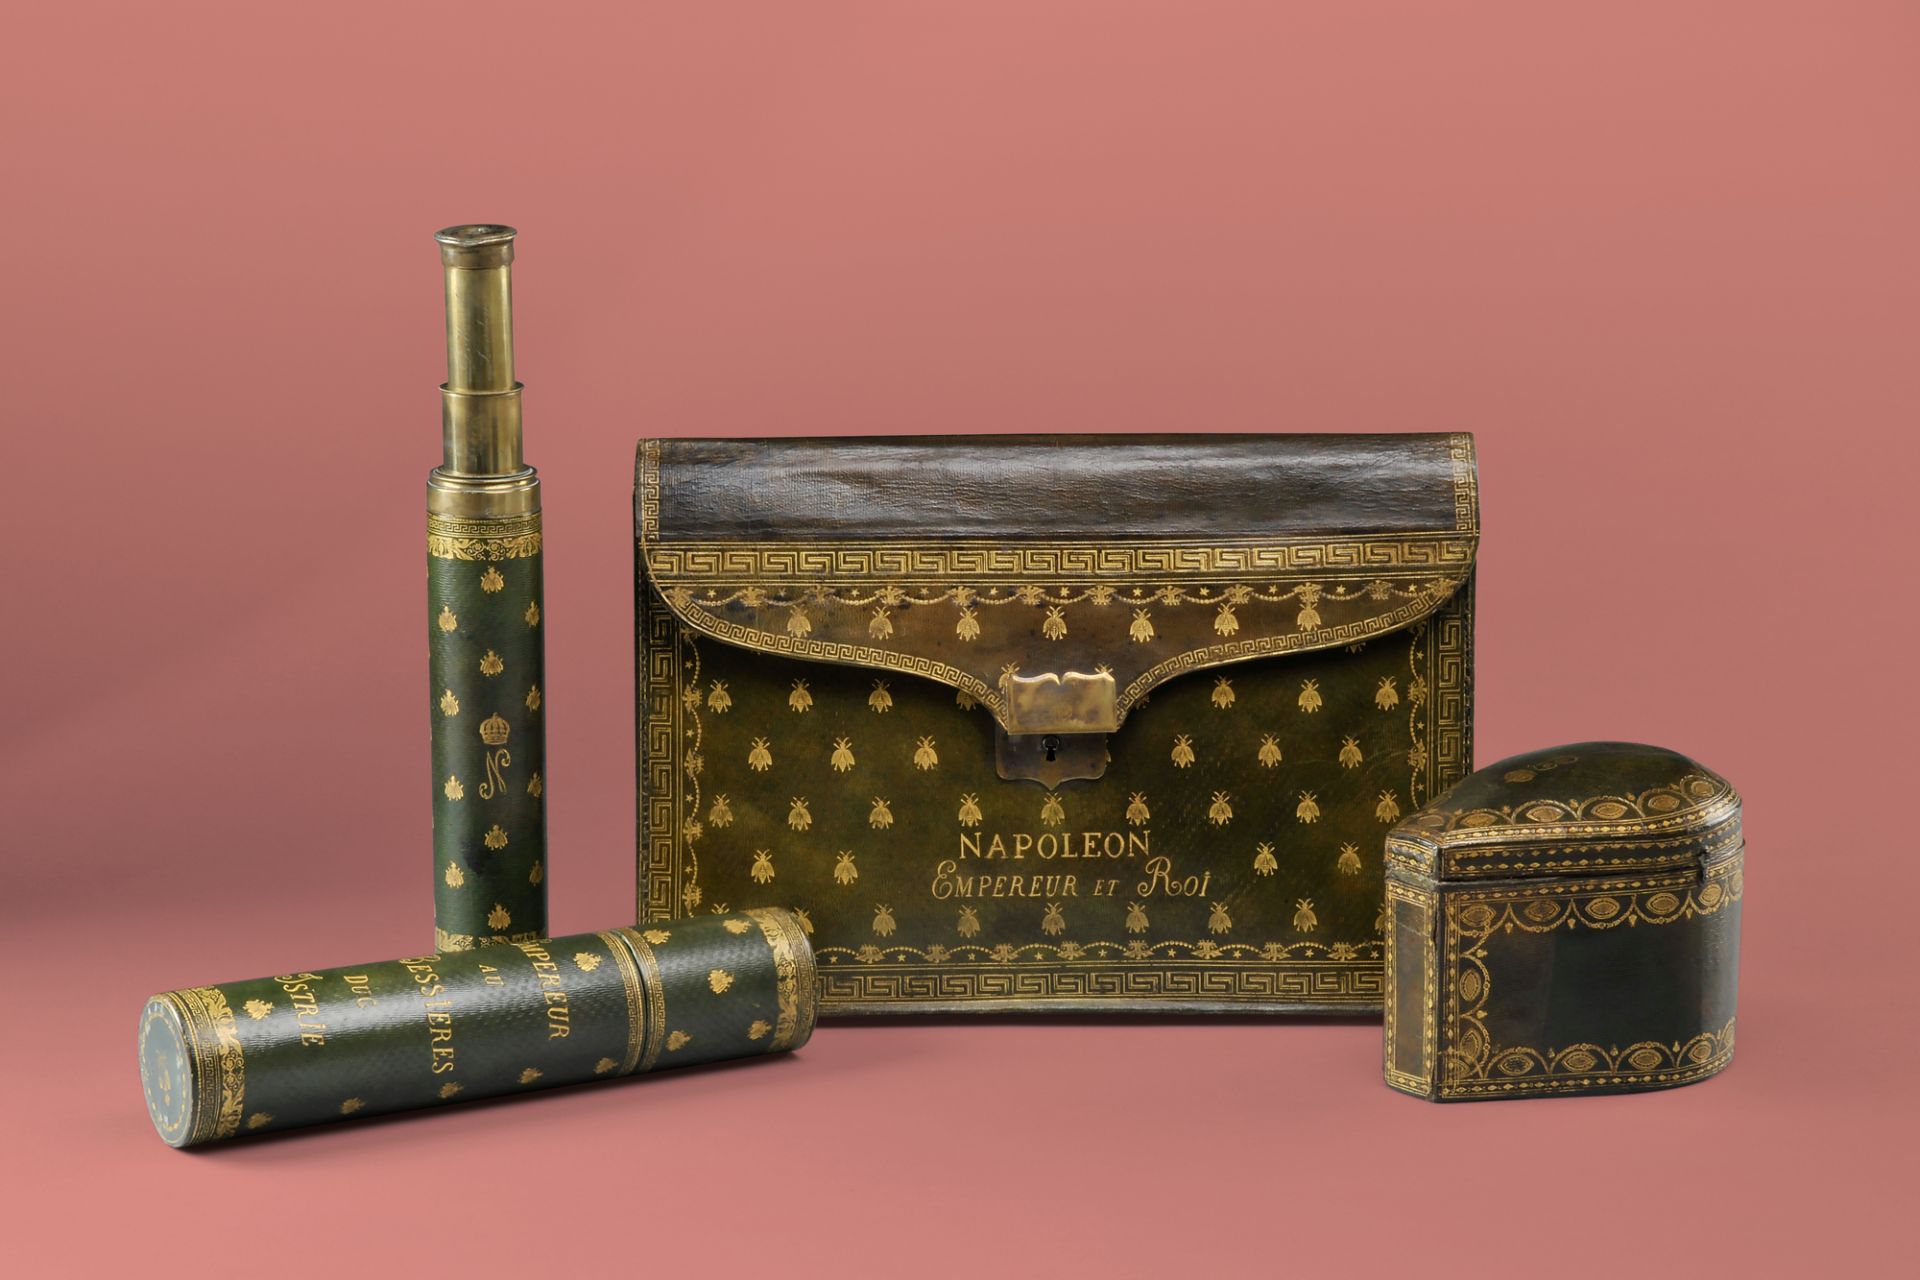 Briefcase and telescope with case for Napoleon I, France, approx. 1810 and Empress Joséphine’s jewelry case, France, approx. 1805